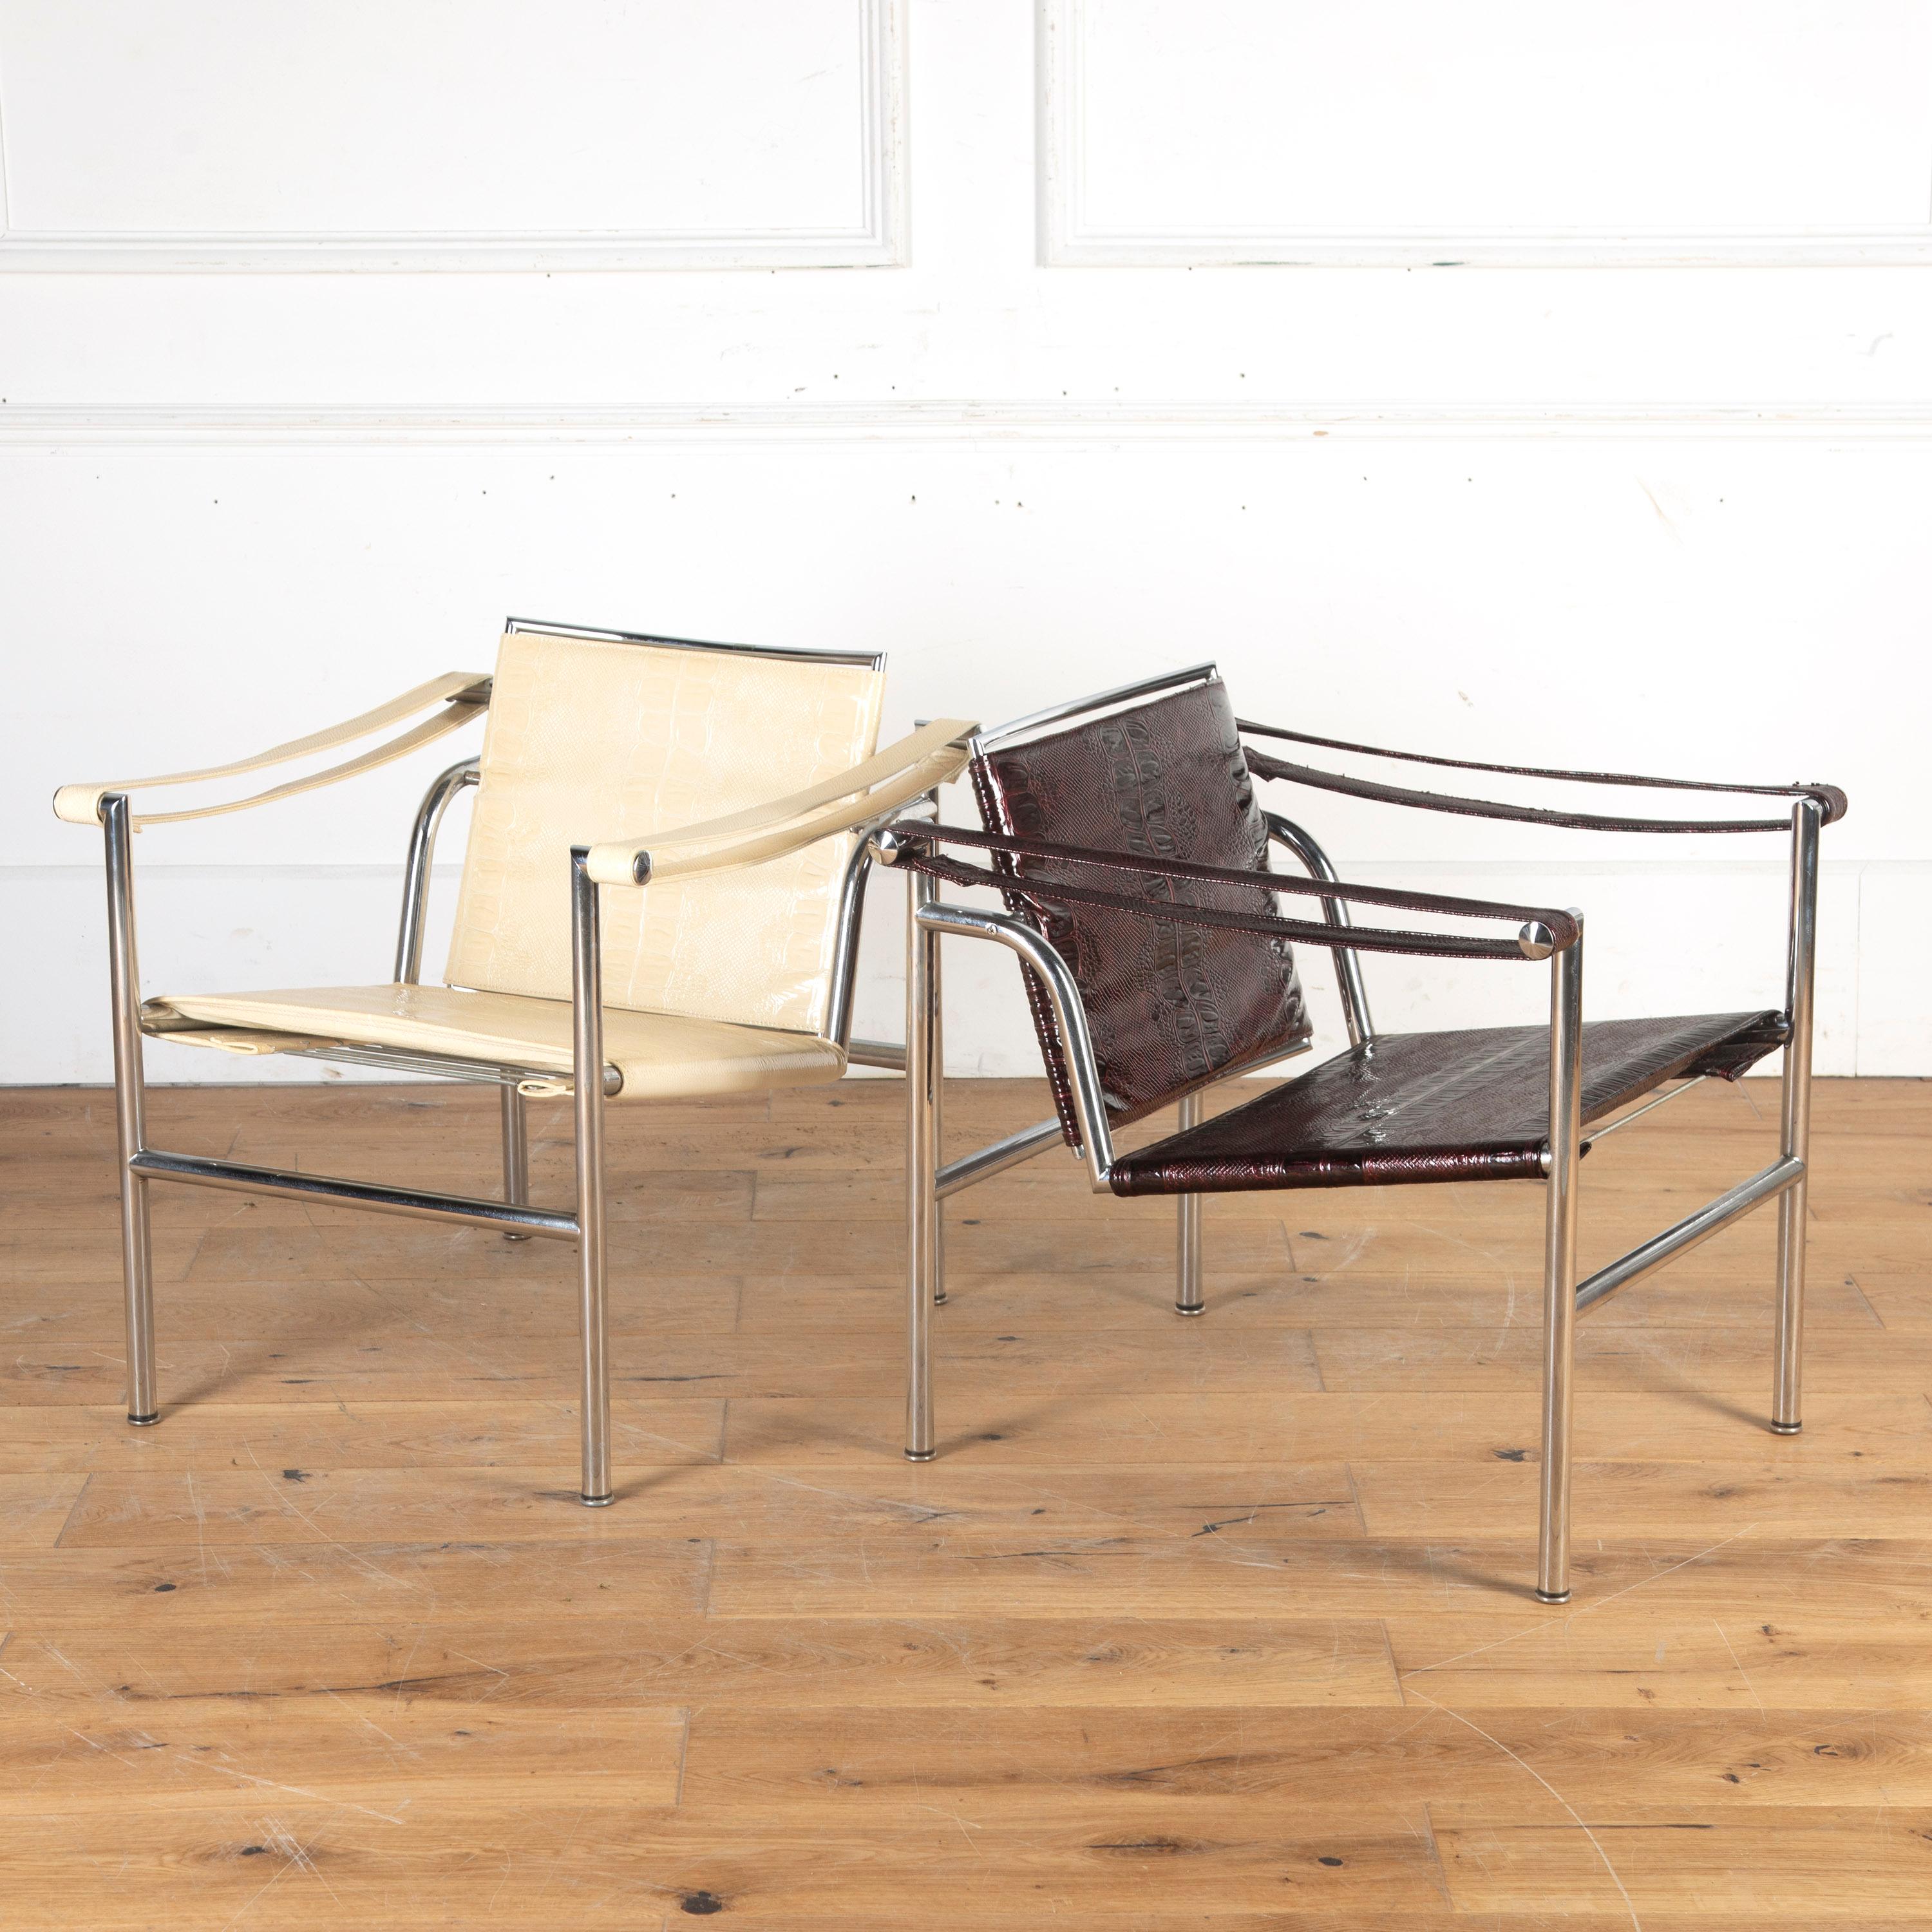 Exceptional pair of Italian LC1 basculant armchairs by Le Corbusier, Charlotte Perriand and Pierre Jeanneret. 

These chairs were designed in 1929, with the original model presented in 1929 for the Paris exposition.

Called 'basculat' because of